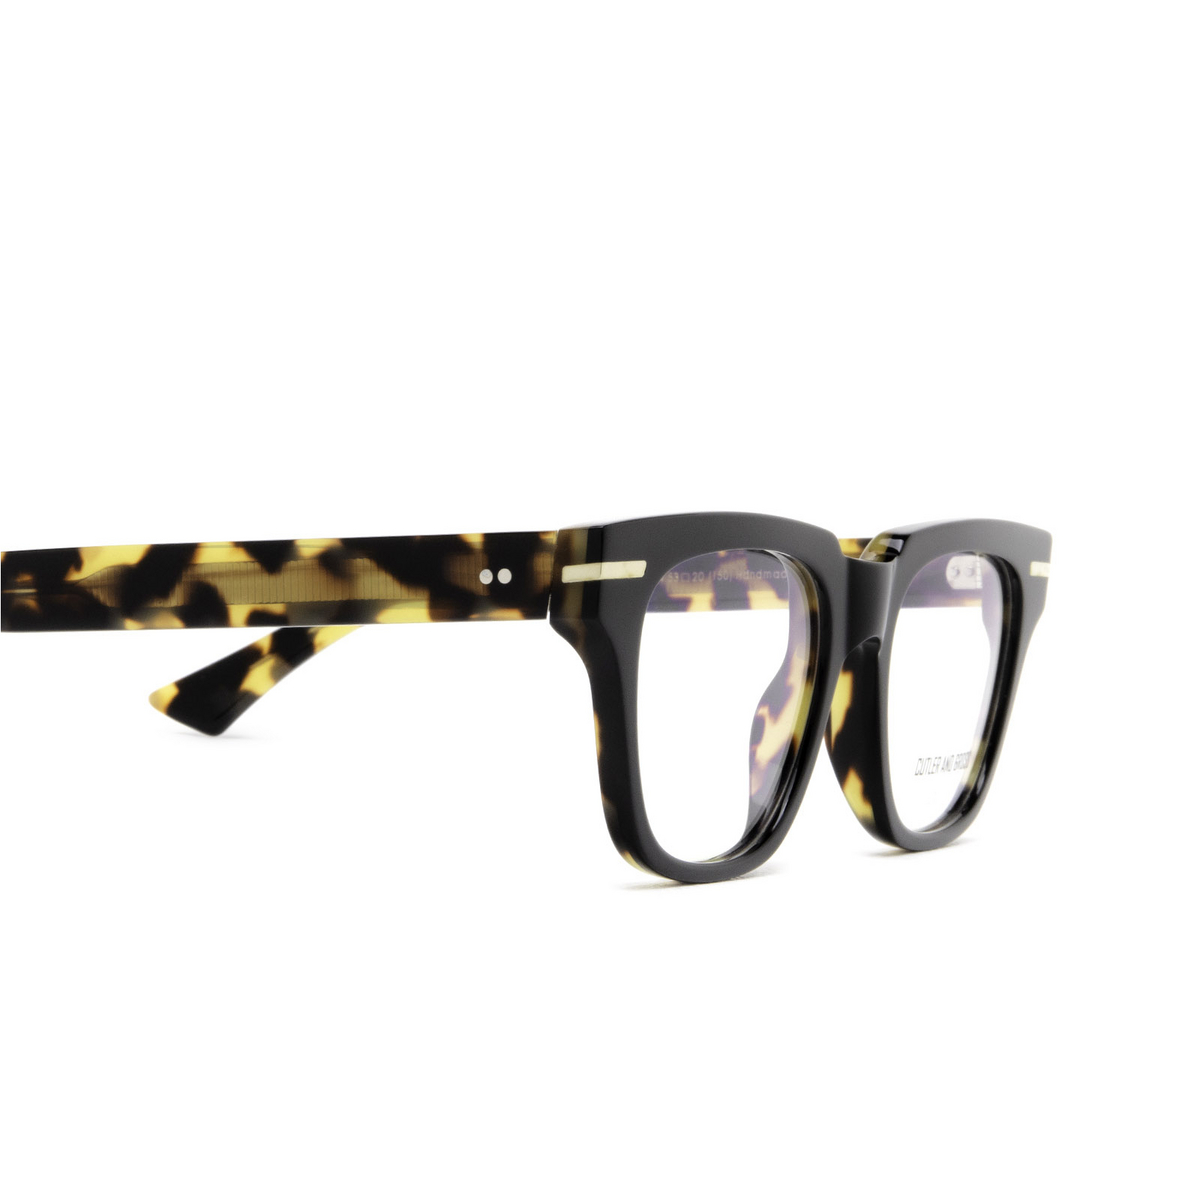 Cutler and Gross 1355 Eyeglasses 04 Black Taxi on Camo - 3/4